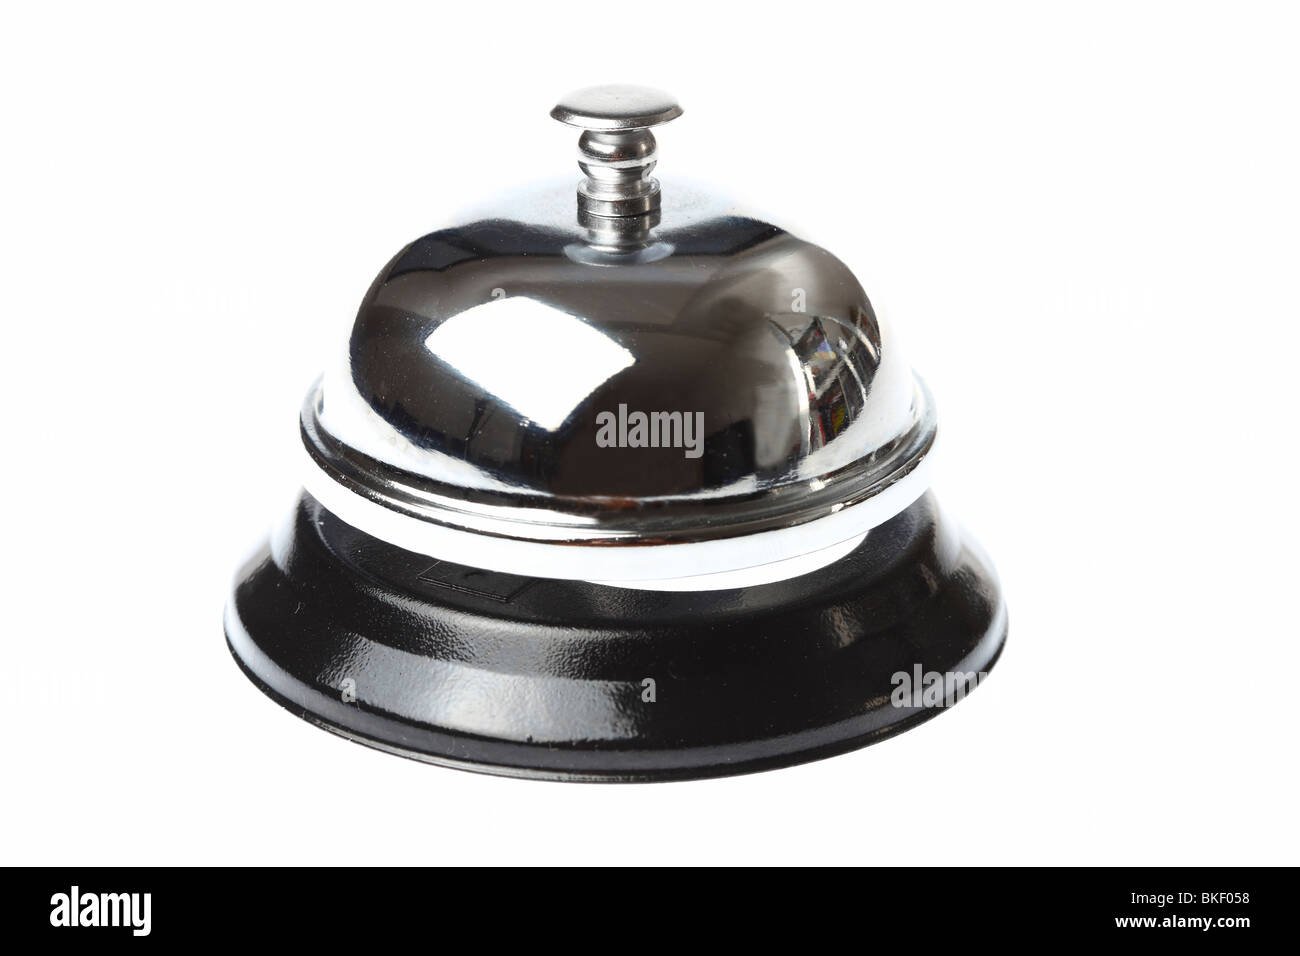 table bell to summon the service staff at the hotel. Restaurant, bar or shop. Stock Photo